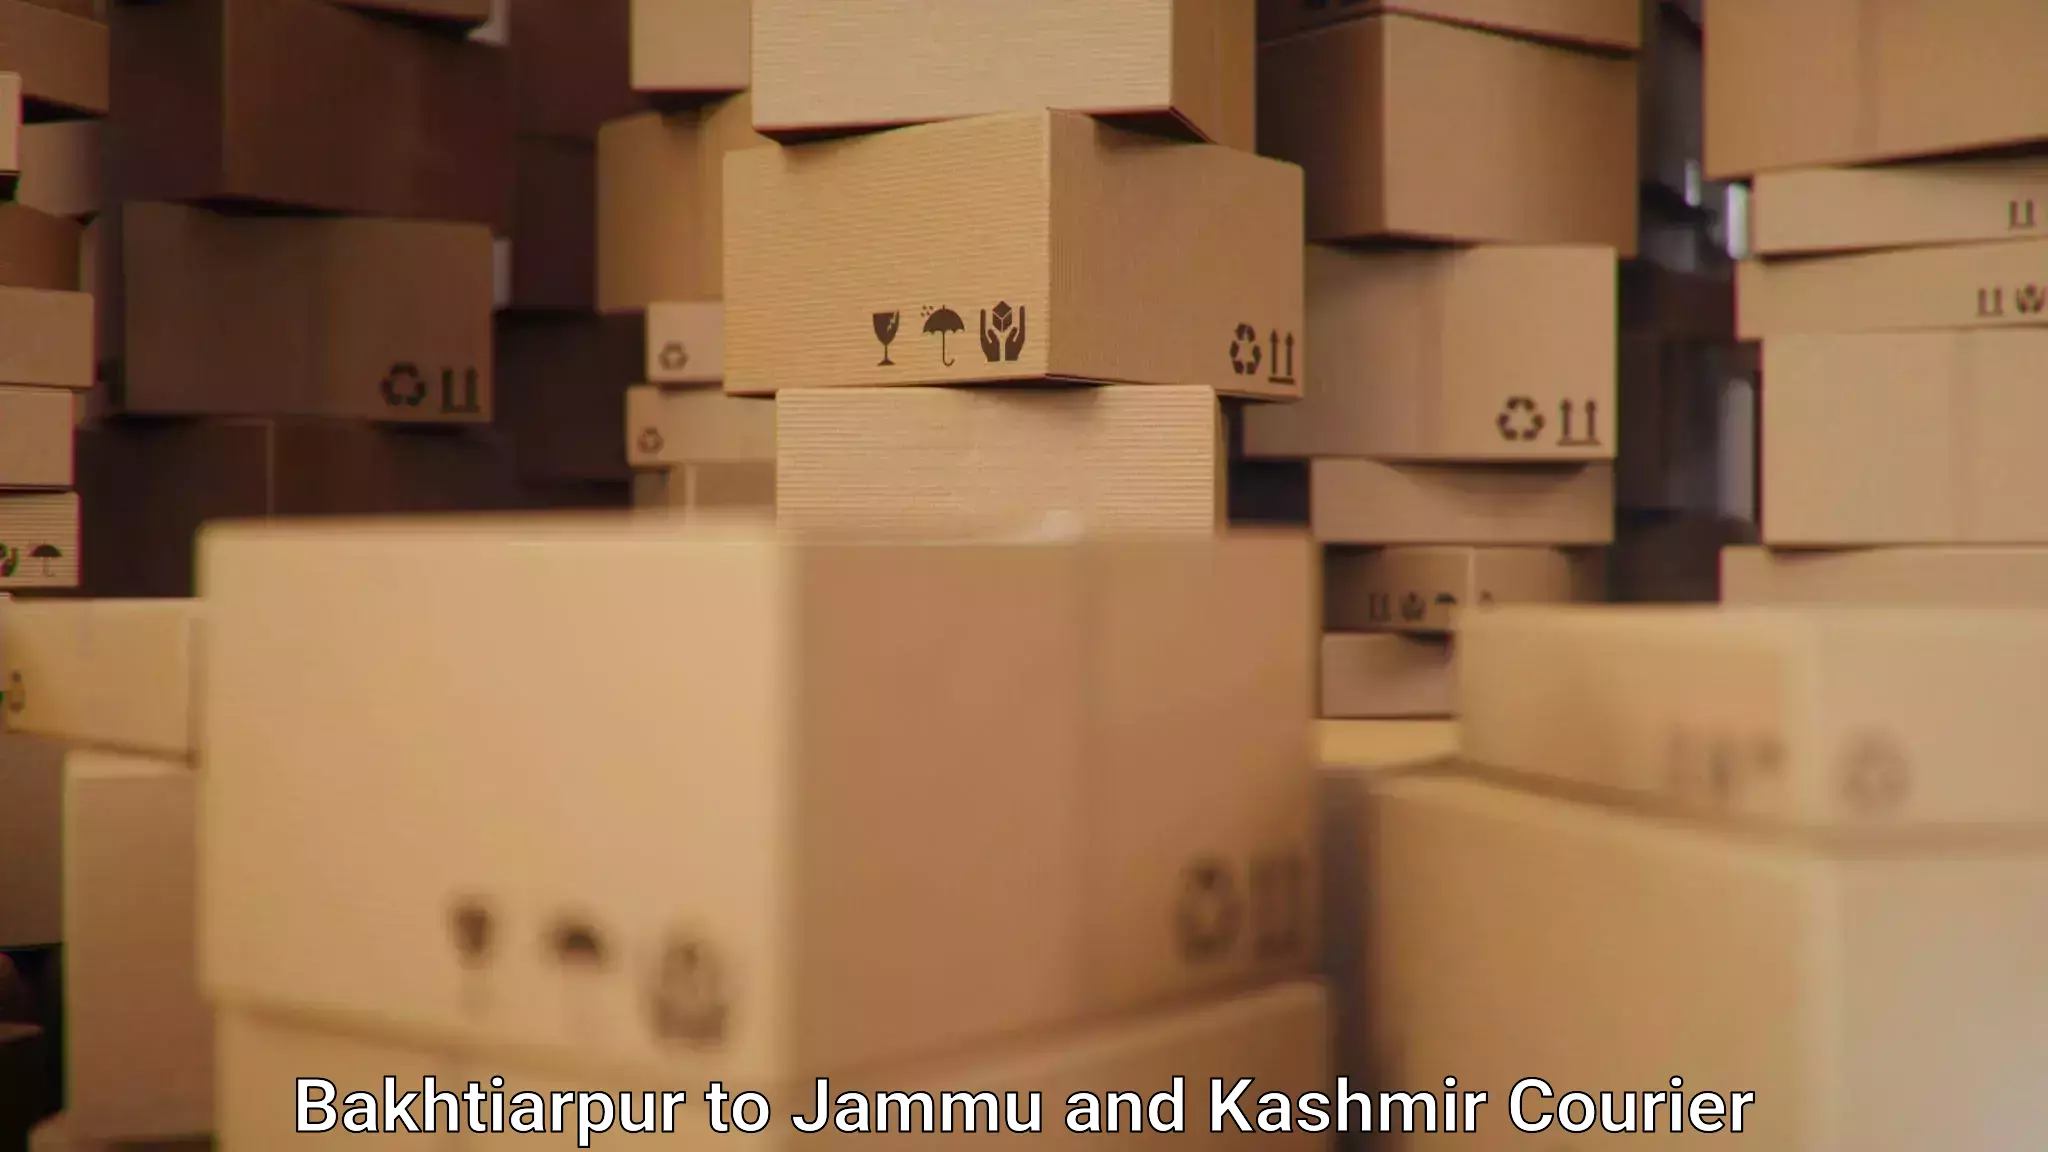 Fast shipping solutions Bakhtiarpur to Pulwama